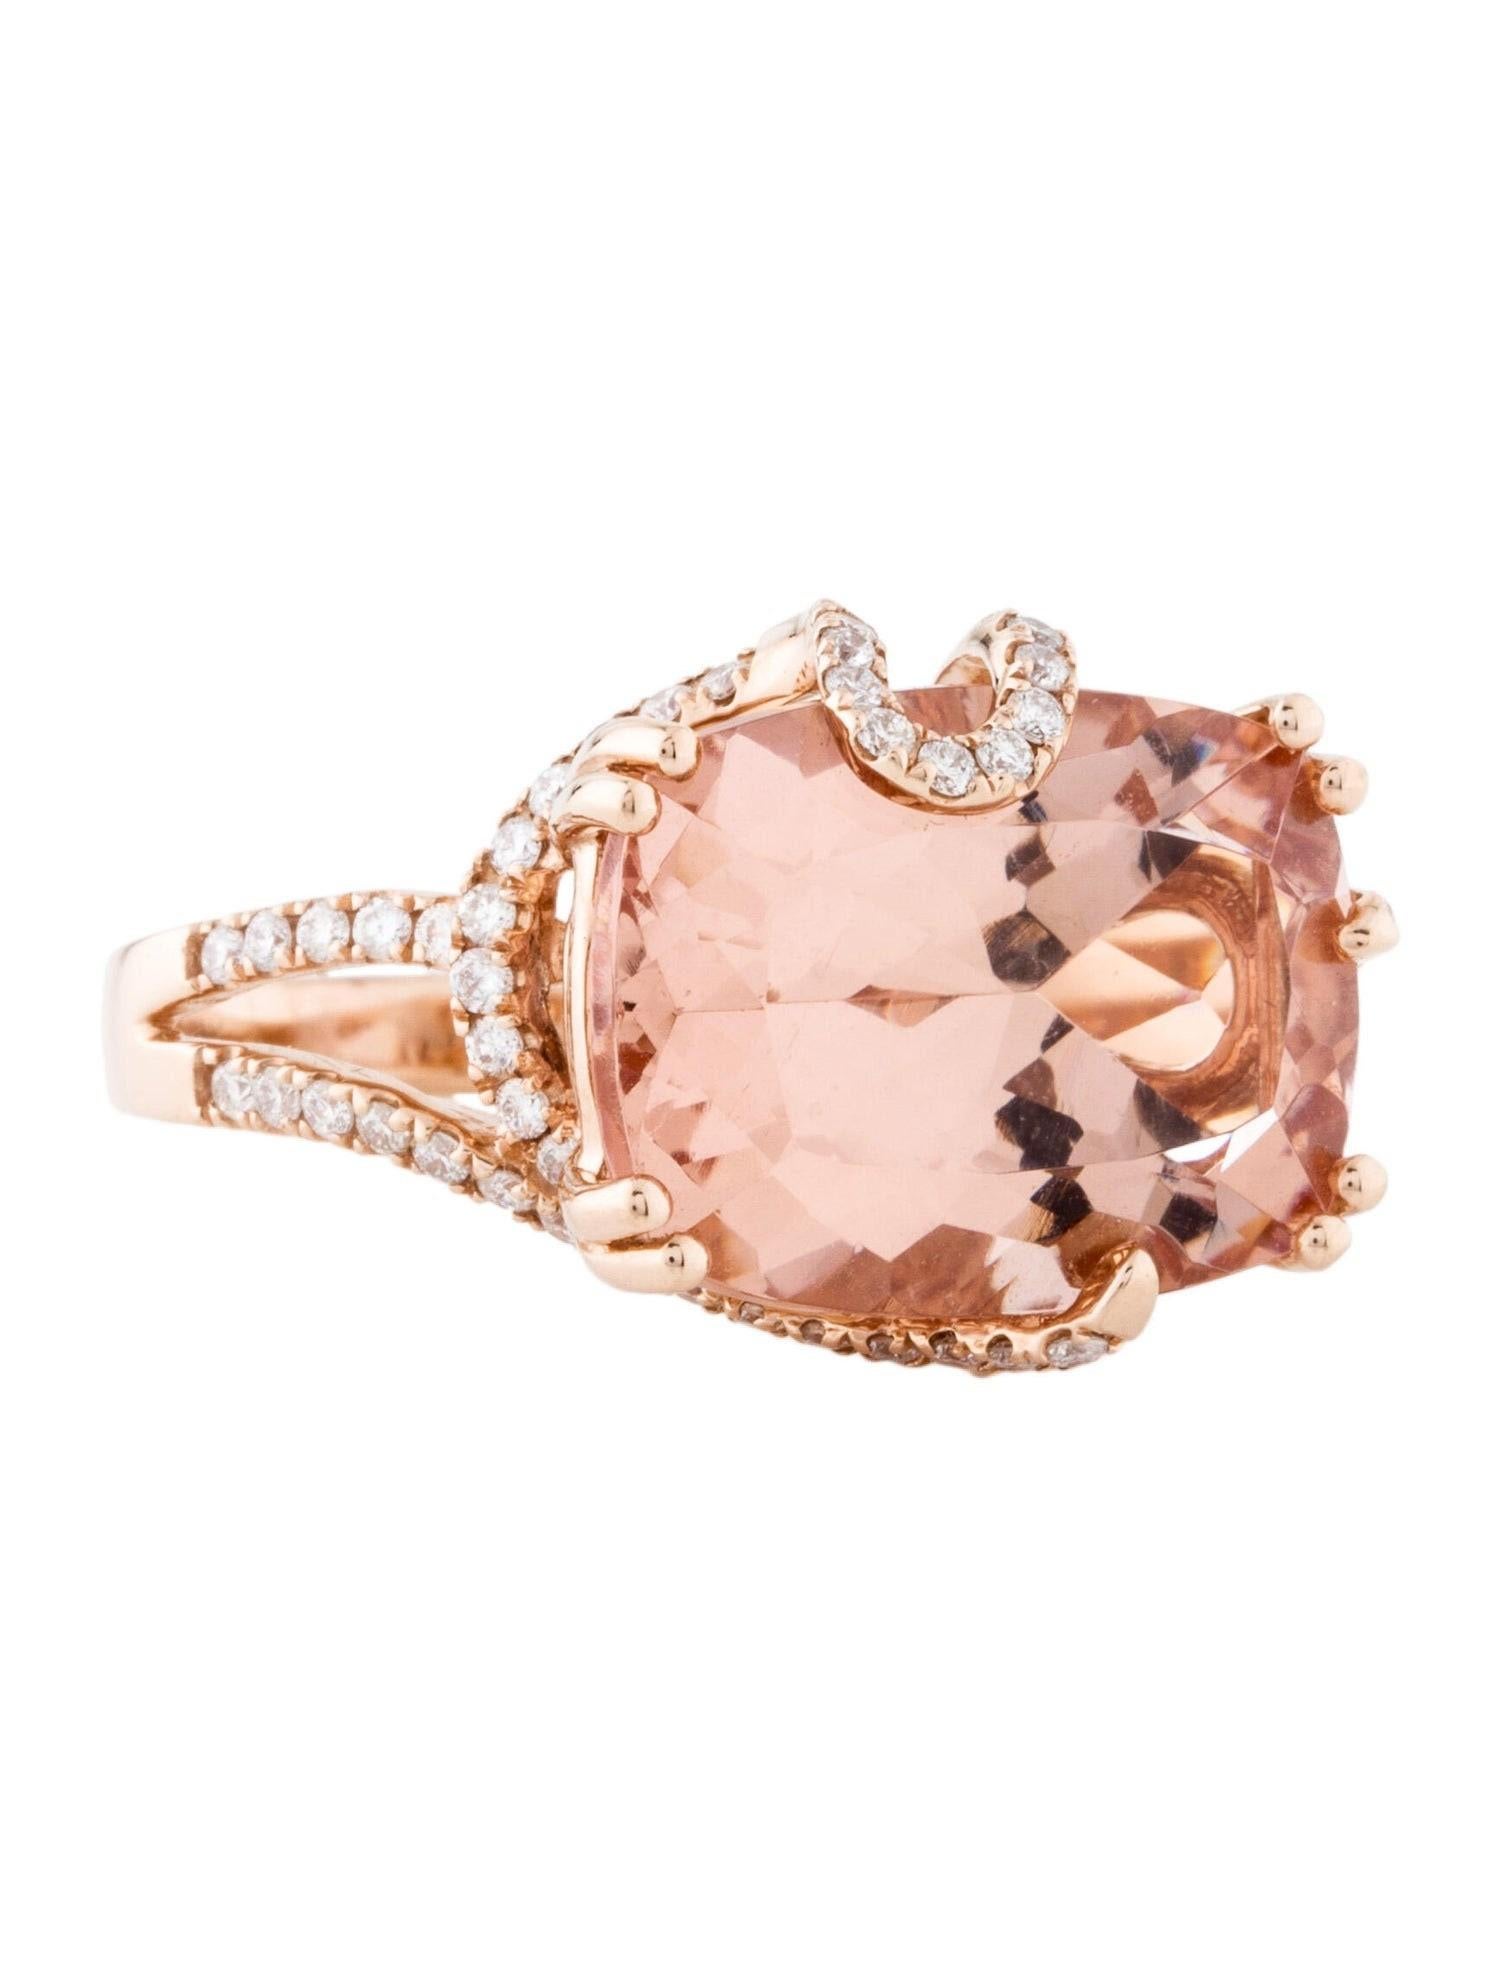 This is a magnificent morganite and diamond cocktail ring set in solid 14K rose gold. The natural large rectangular cushion cut 12.3 Ct morganite has an excellent peachy pink color (AAA quality gem) and has a unique diamond encrusted shank that. The